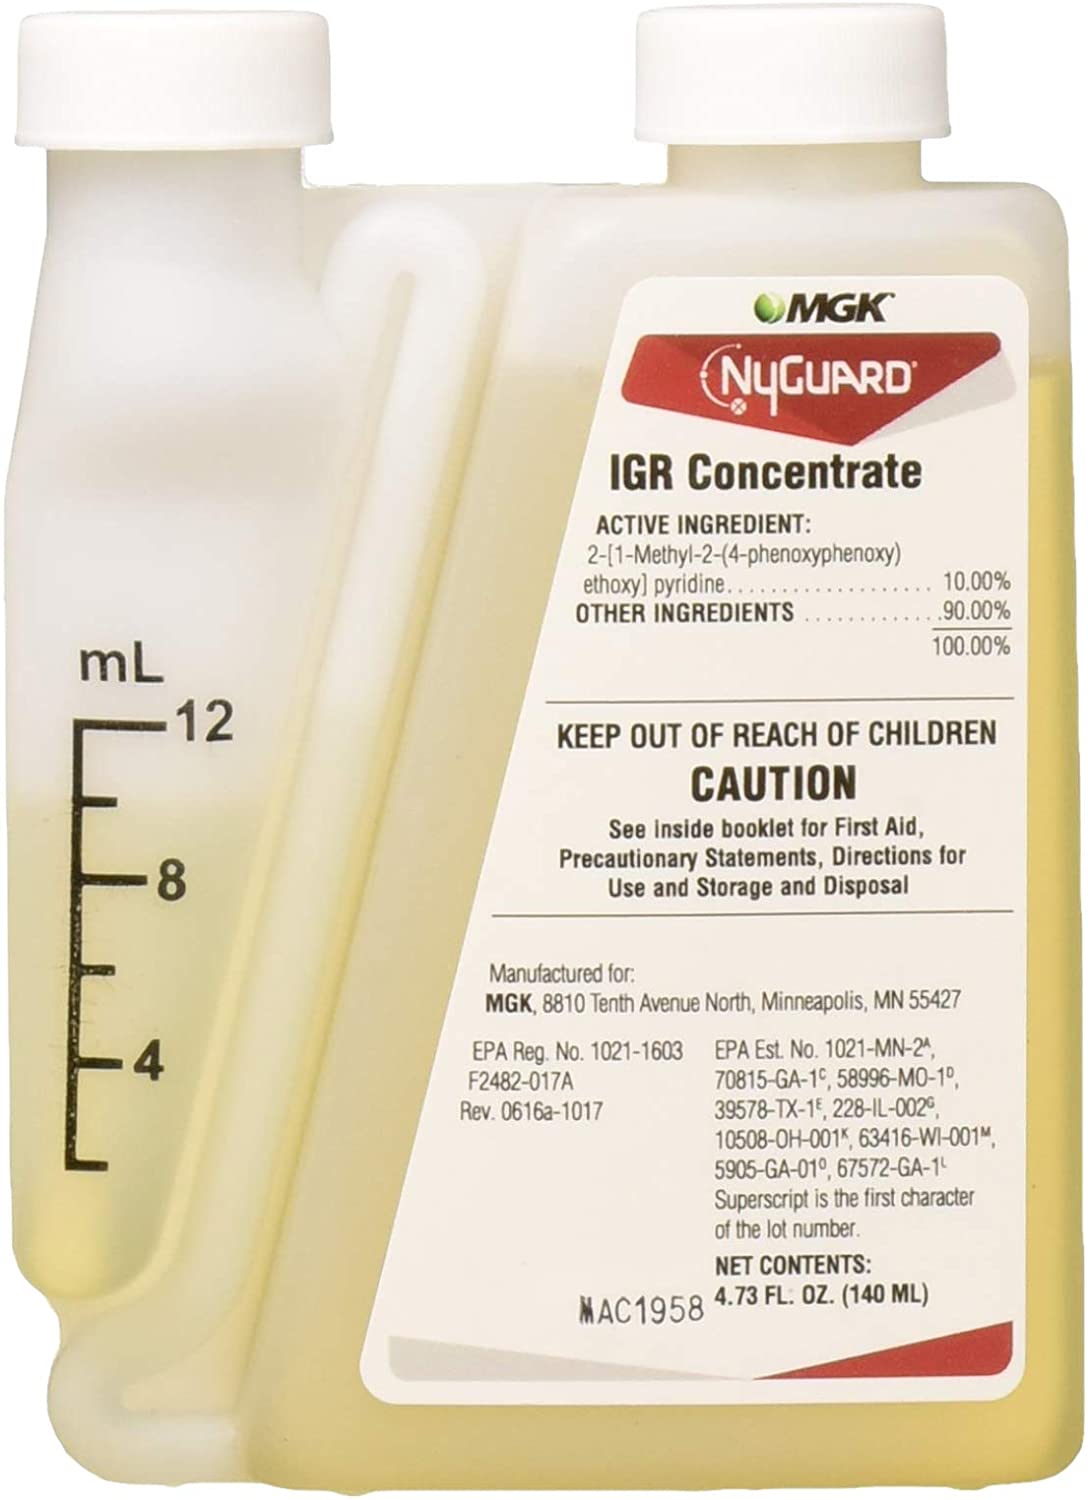 MGK NyGuard IGR Concentrate Insecticide